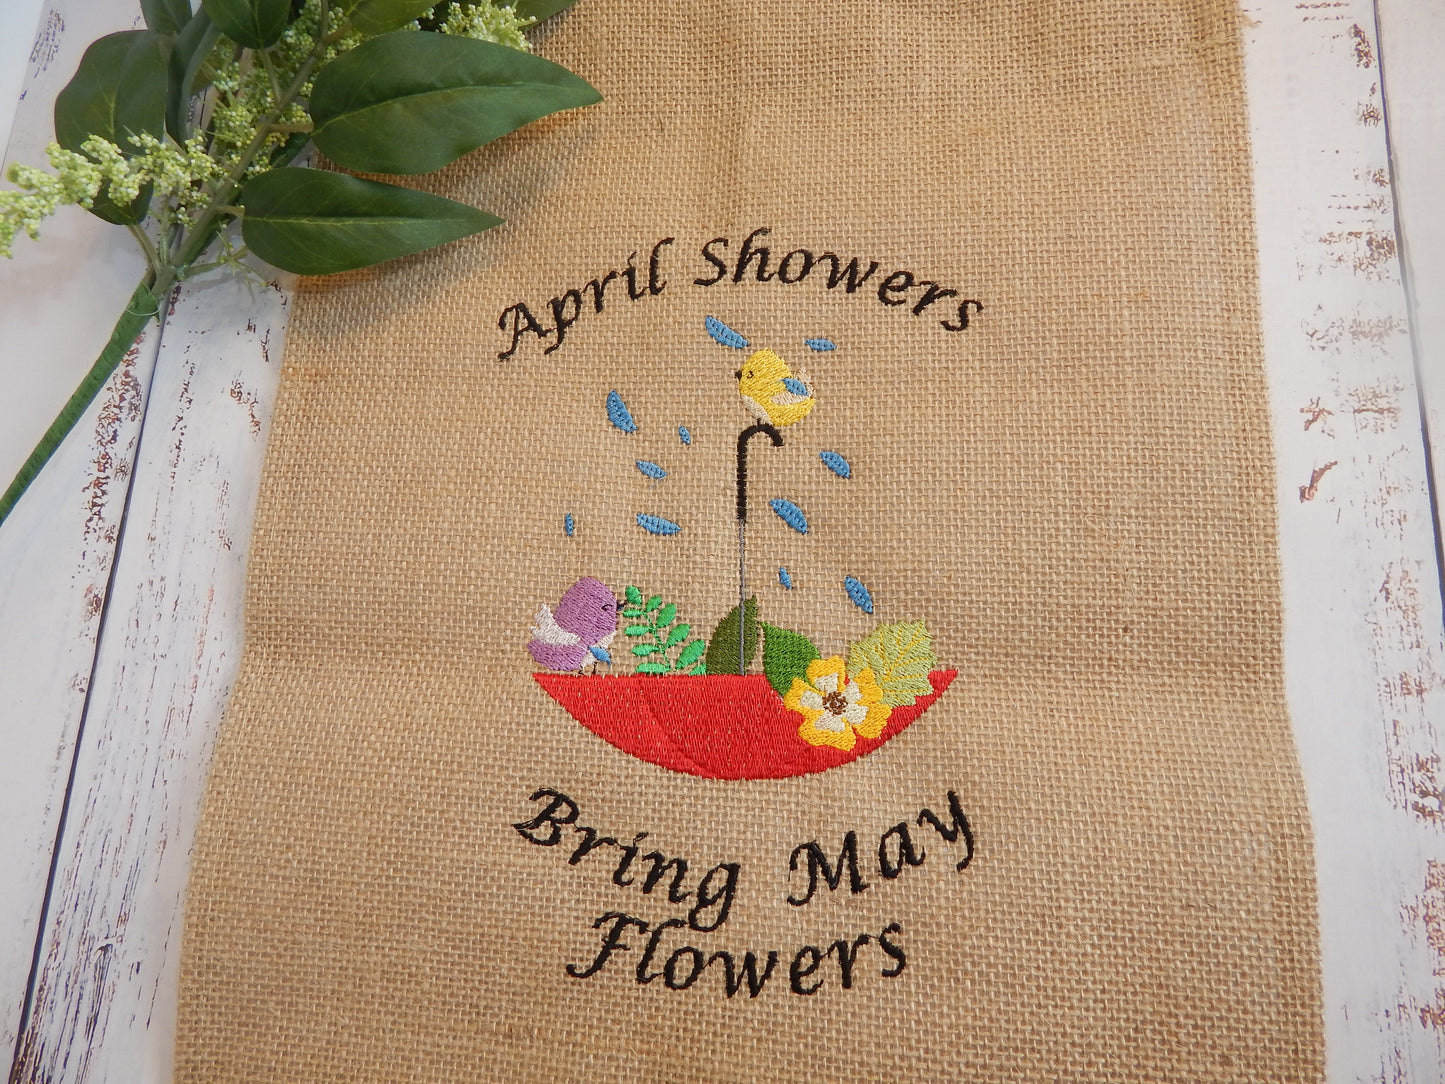 April Showers Bring May Flowers| Spring Garden Flag | Housewarming | Gift | Garden | Customize | Embroidered Flag | Decoration | Welcome Spring|